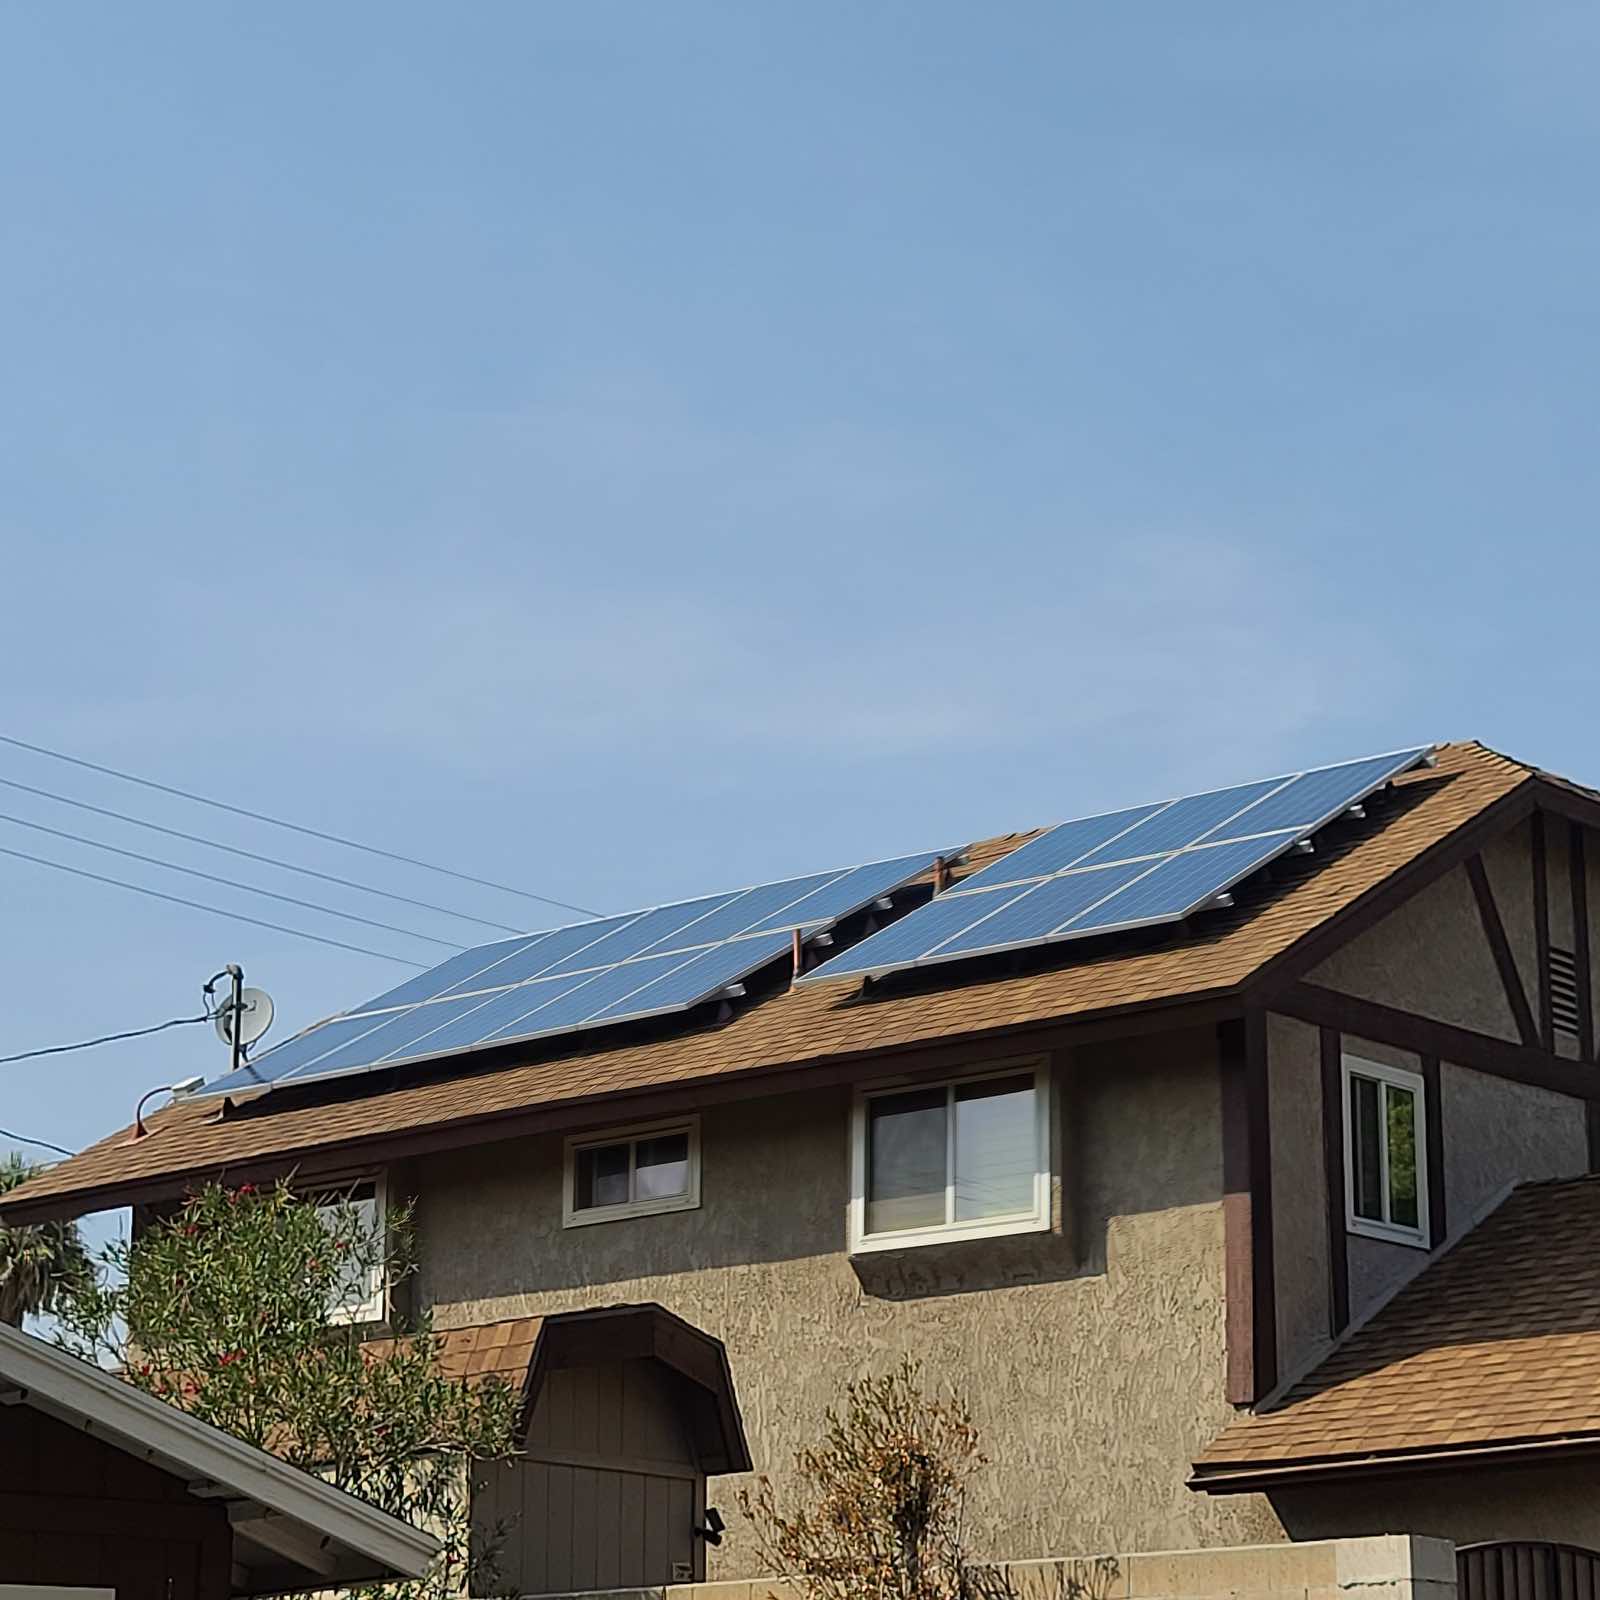 Redlands Residential Solar Panel Cleaning Service